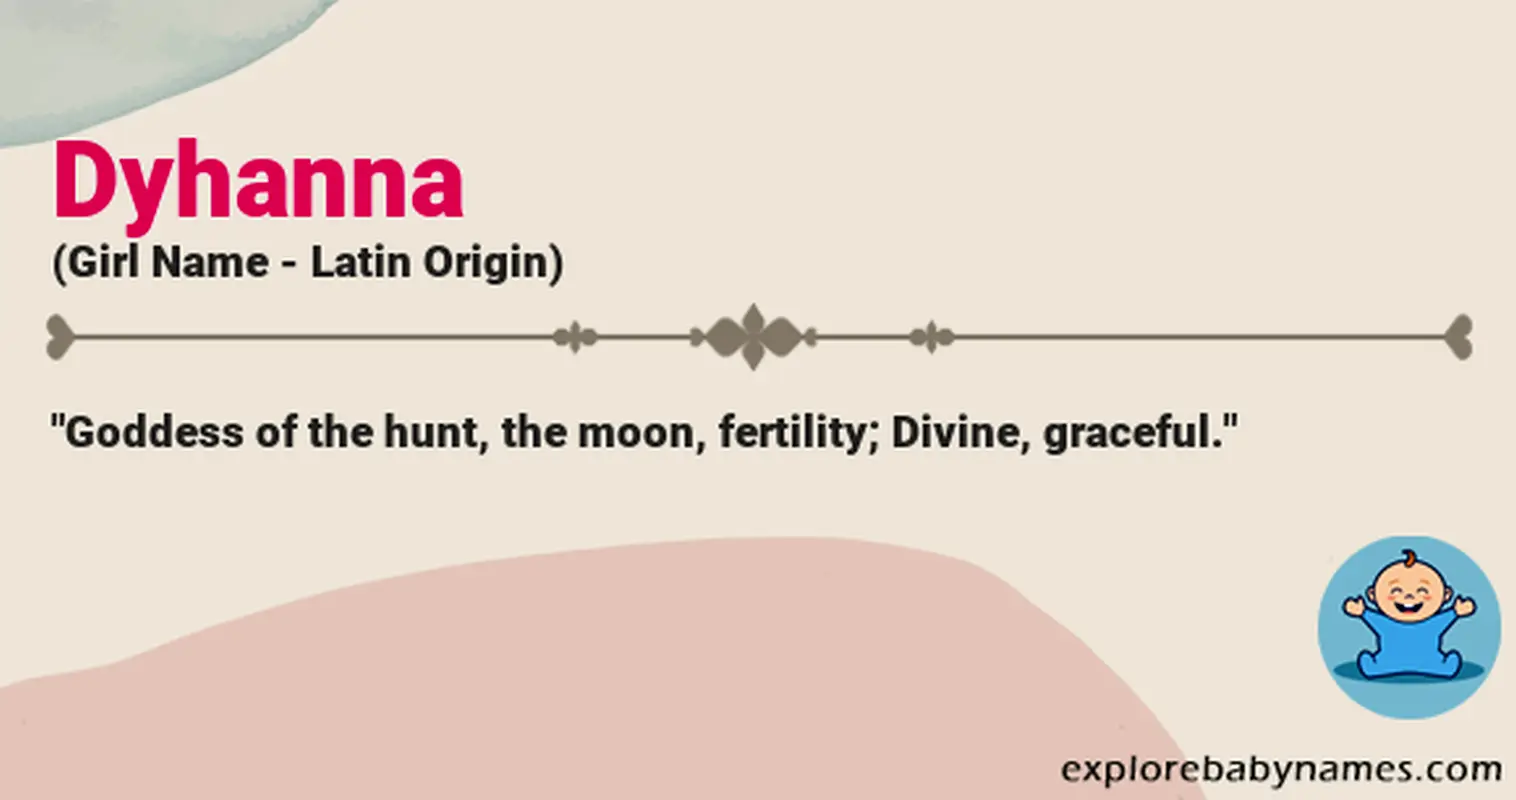 Meaning of Dyhanna